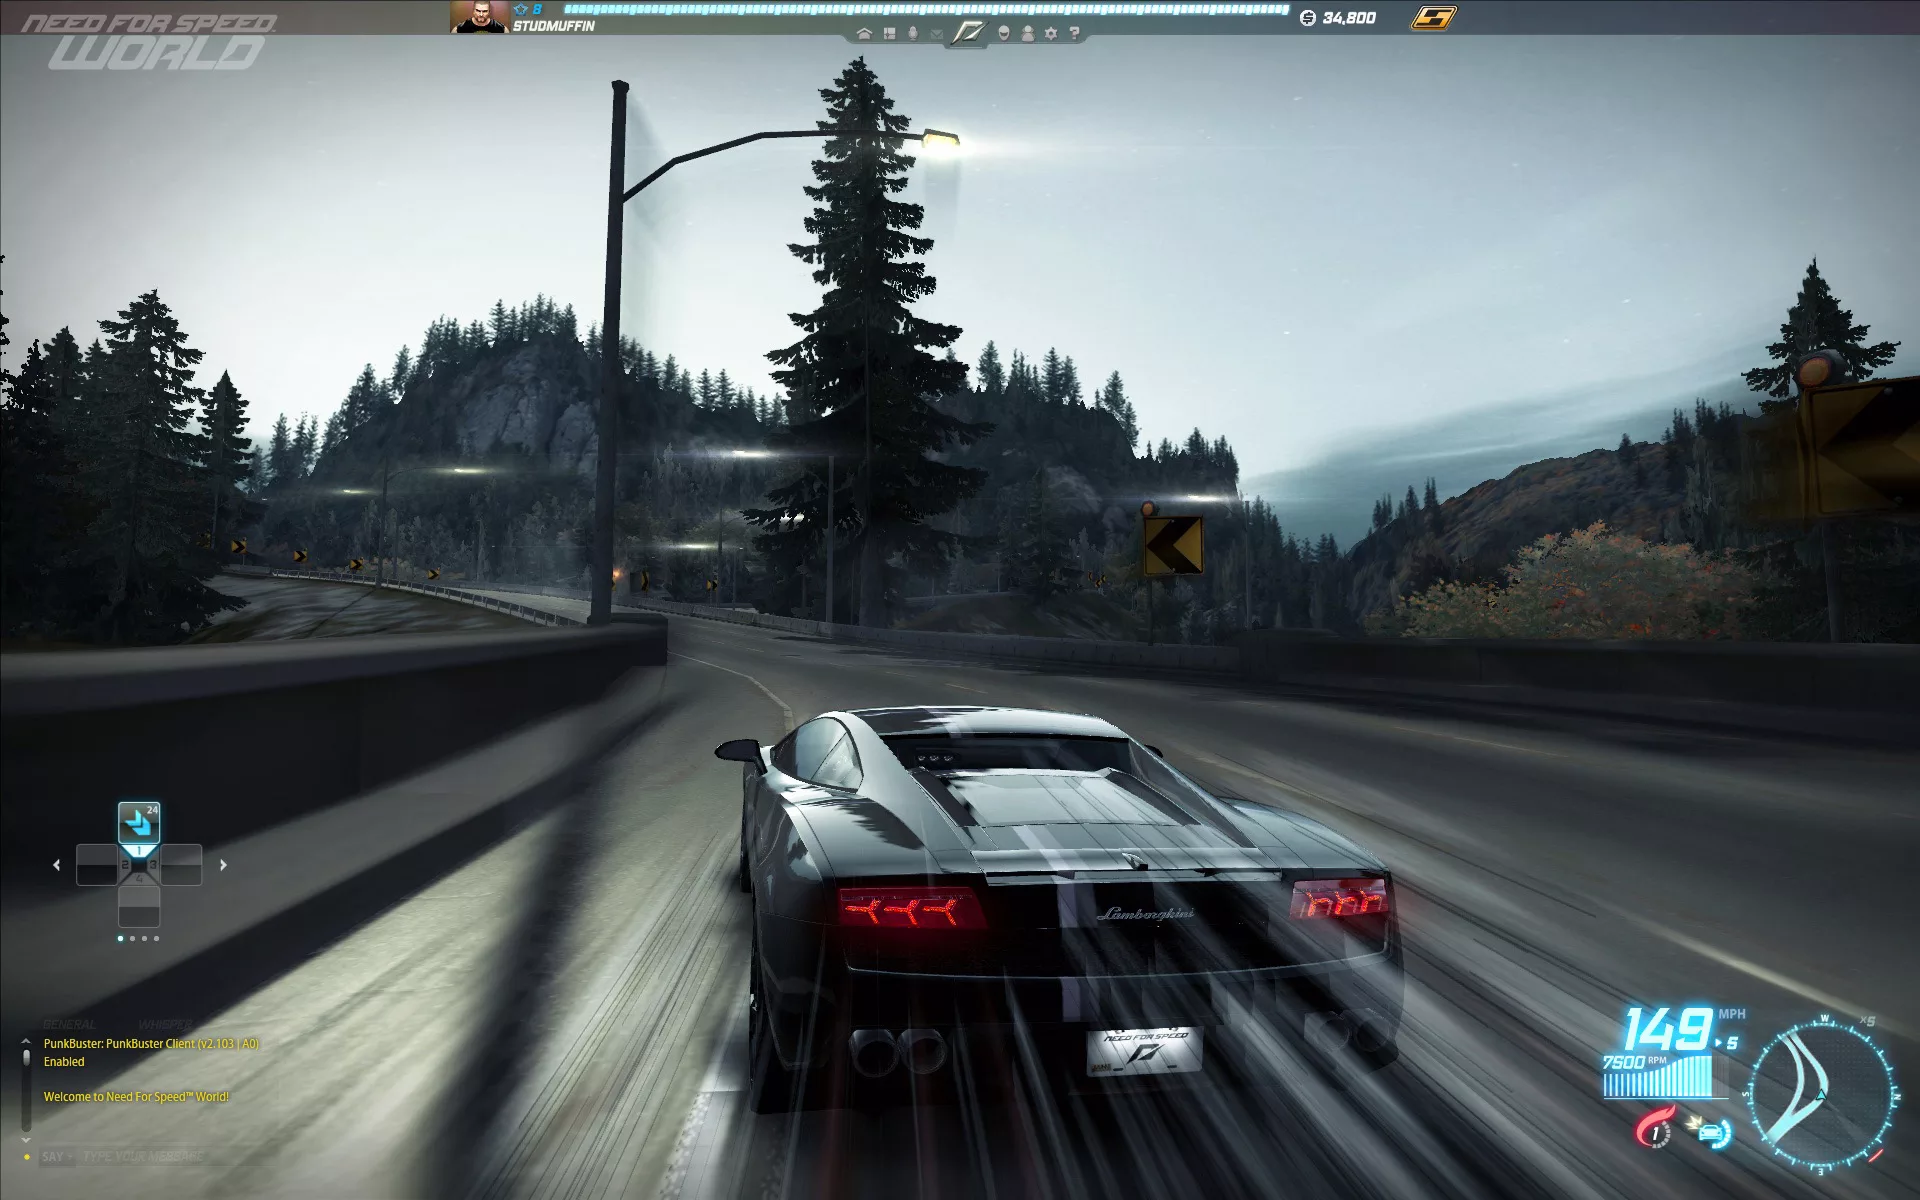 Need for Speed World Torrent